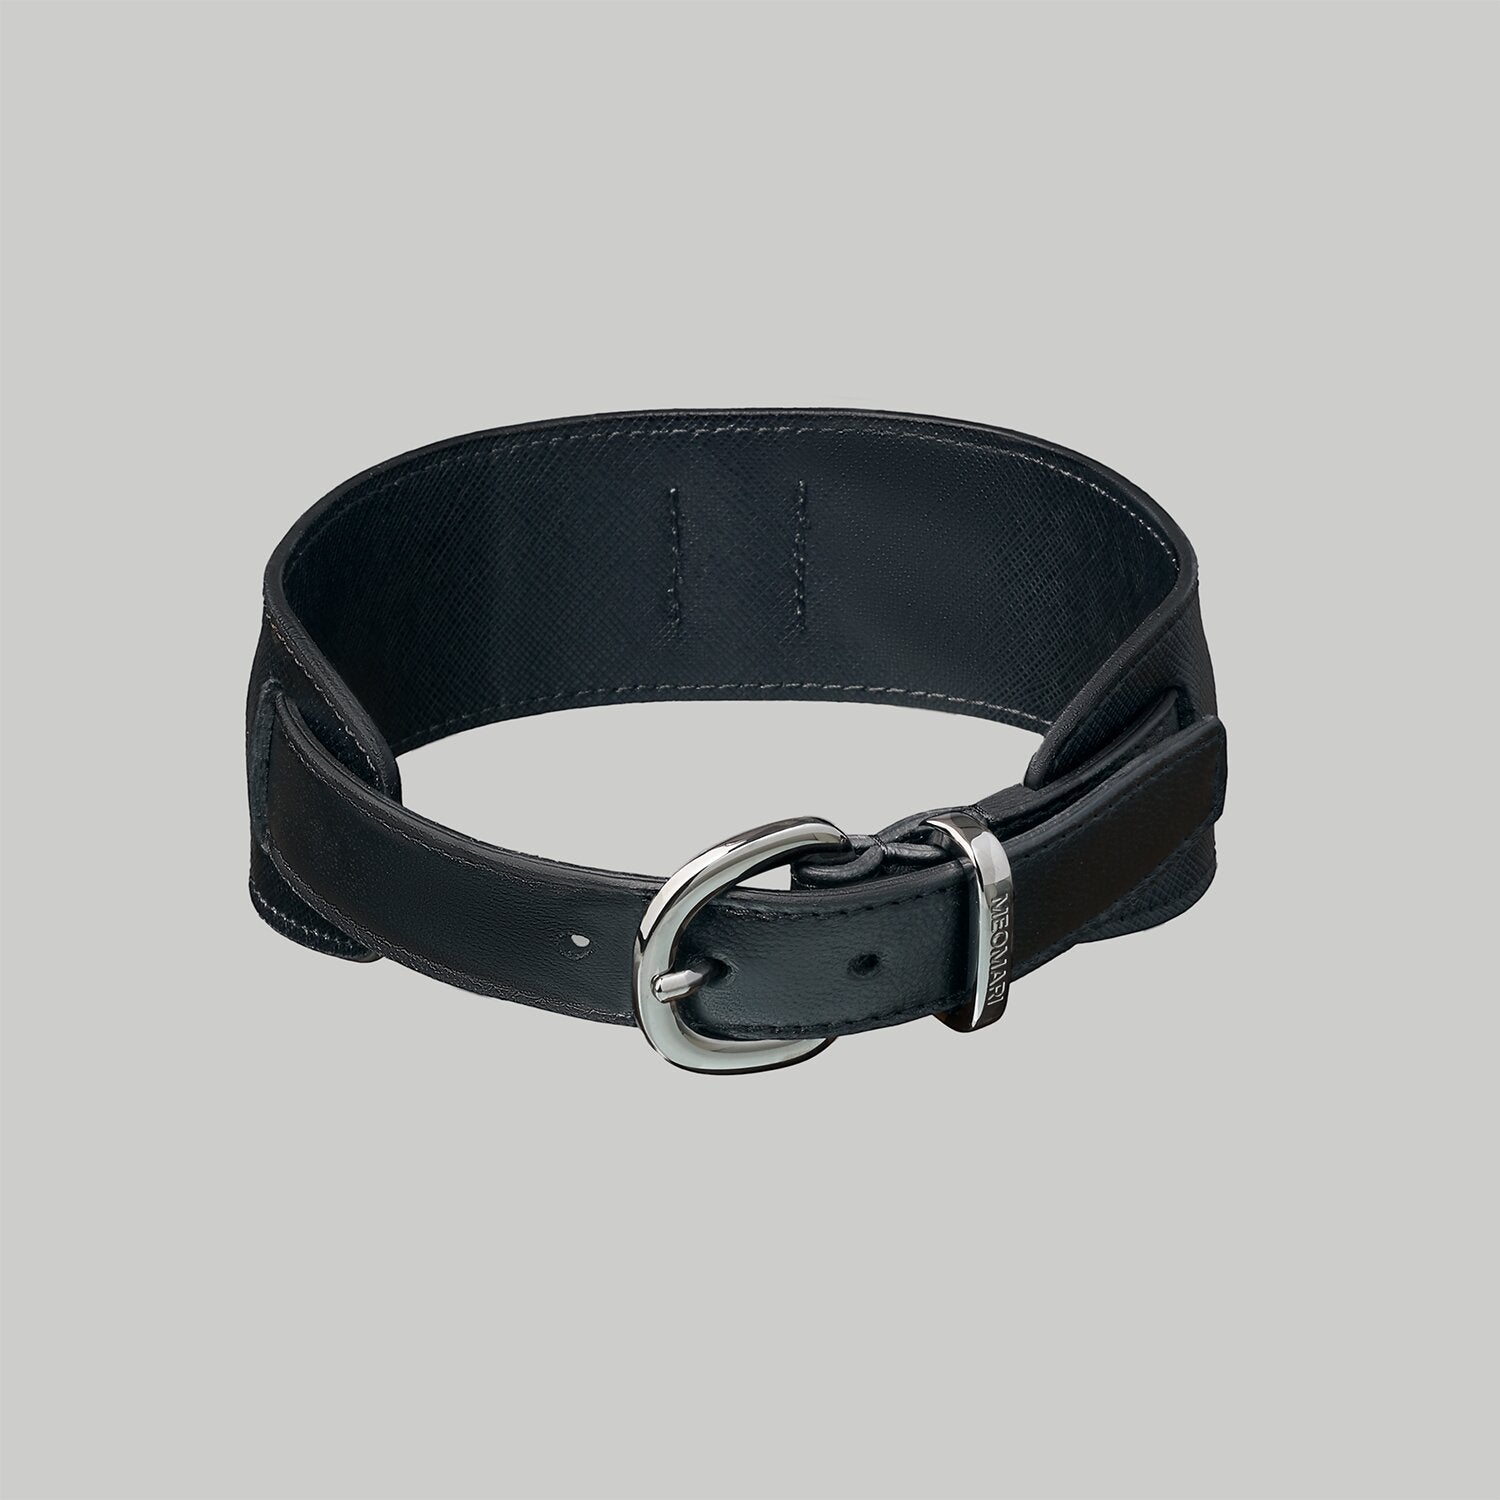 Luxury dog collar in black Saffiano leather with Ruthenium